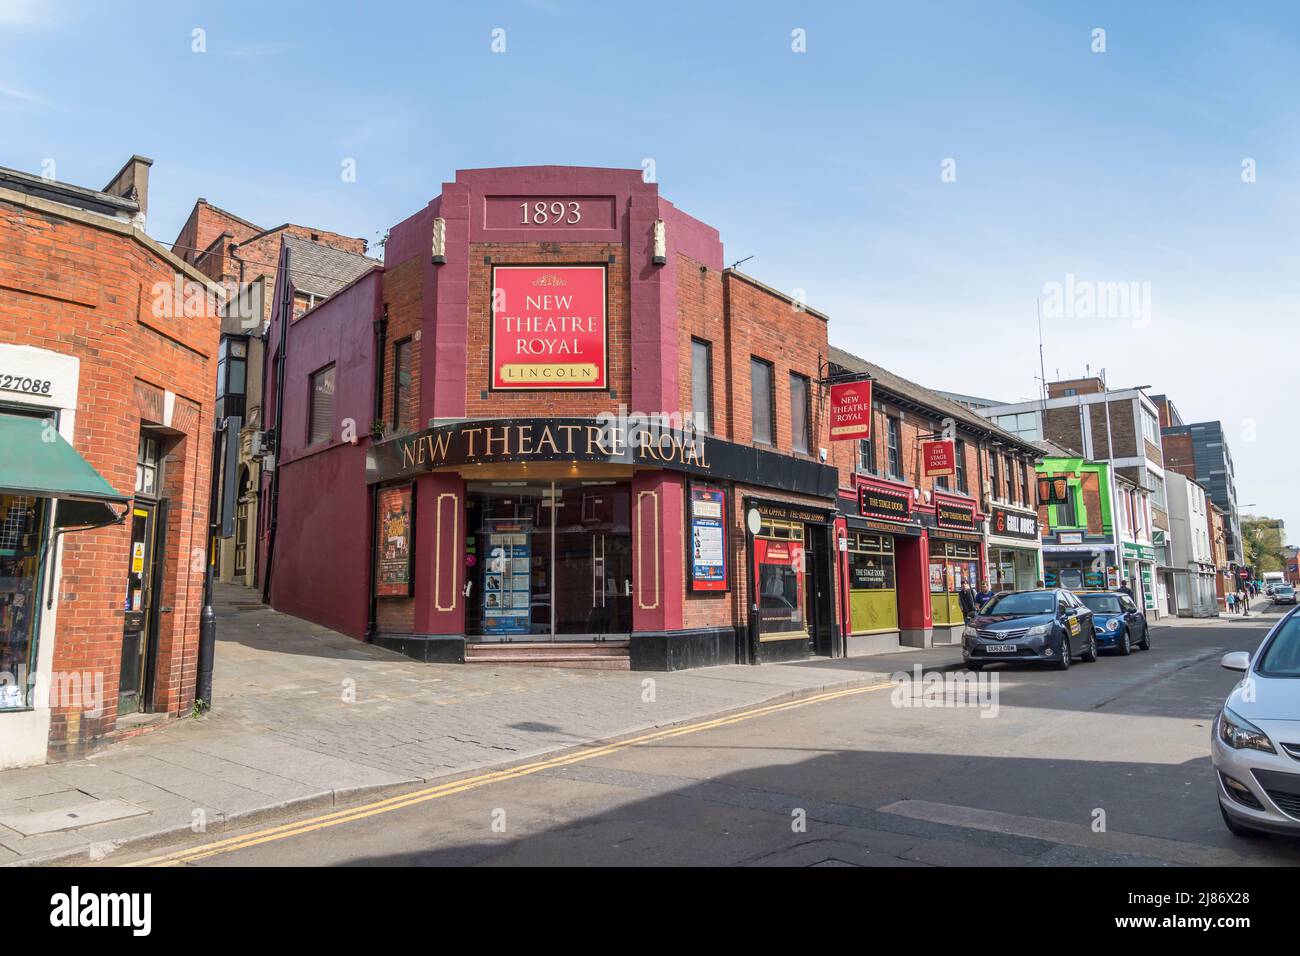 New Theatre Royal Lincoln Clasketgate Low town Lincoln city 2022 Stock Photo